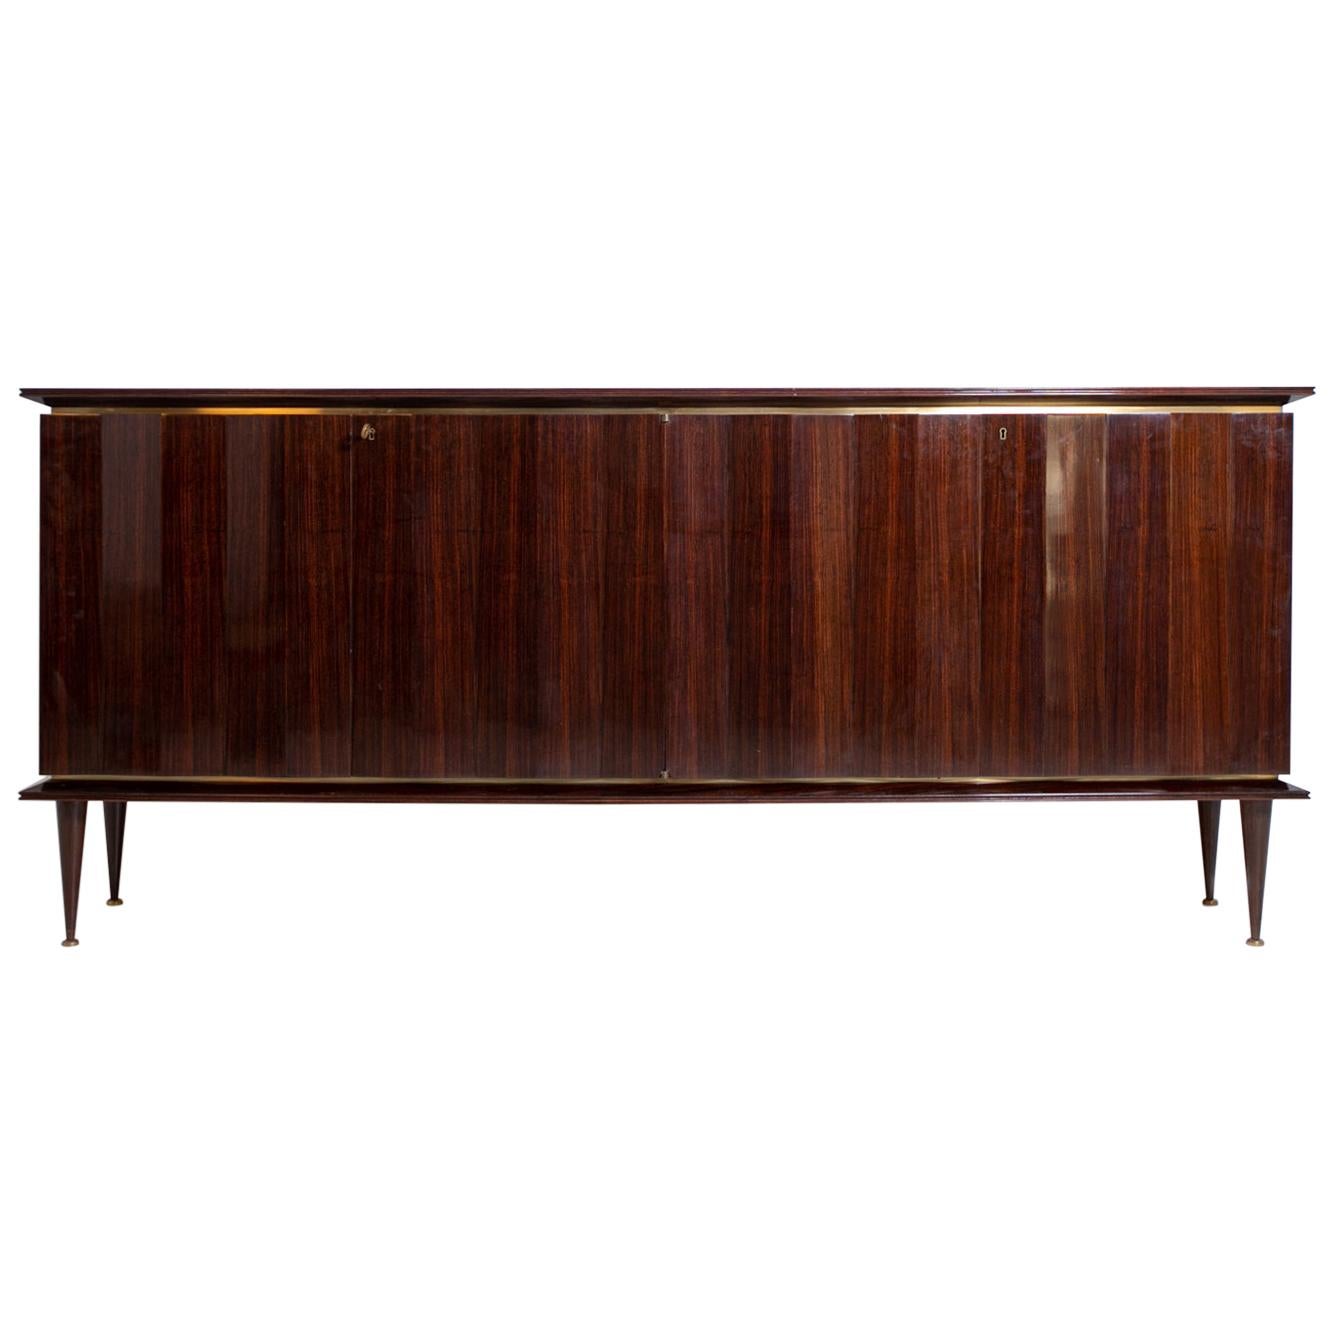 Sideboard Bu Melchiorre Bega in in Precious Wood and Brass, 1950s